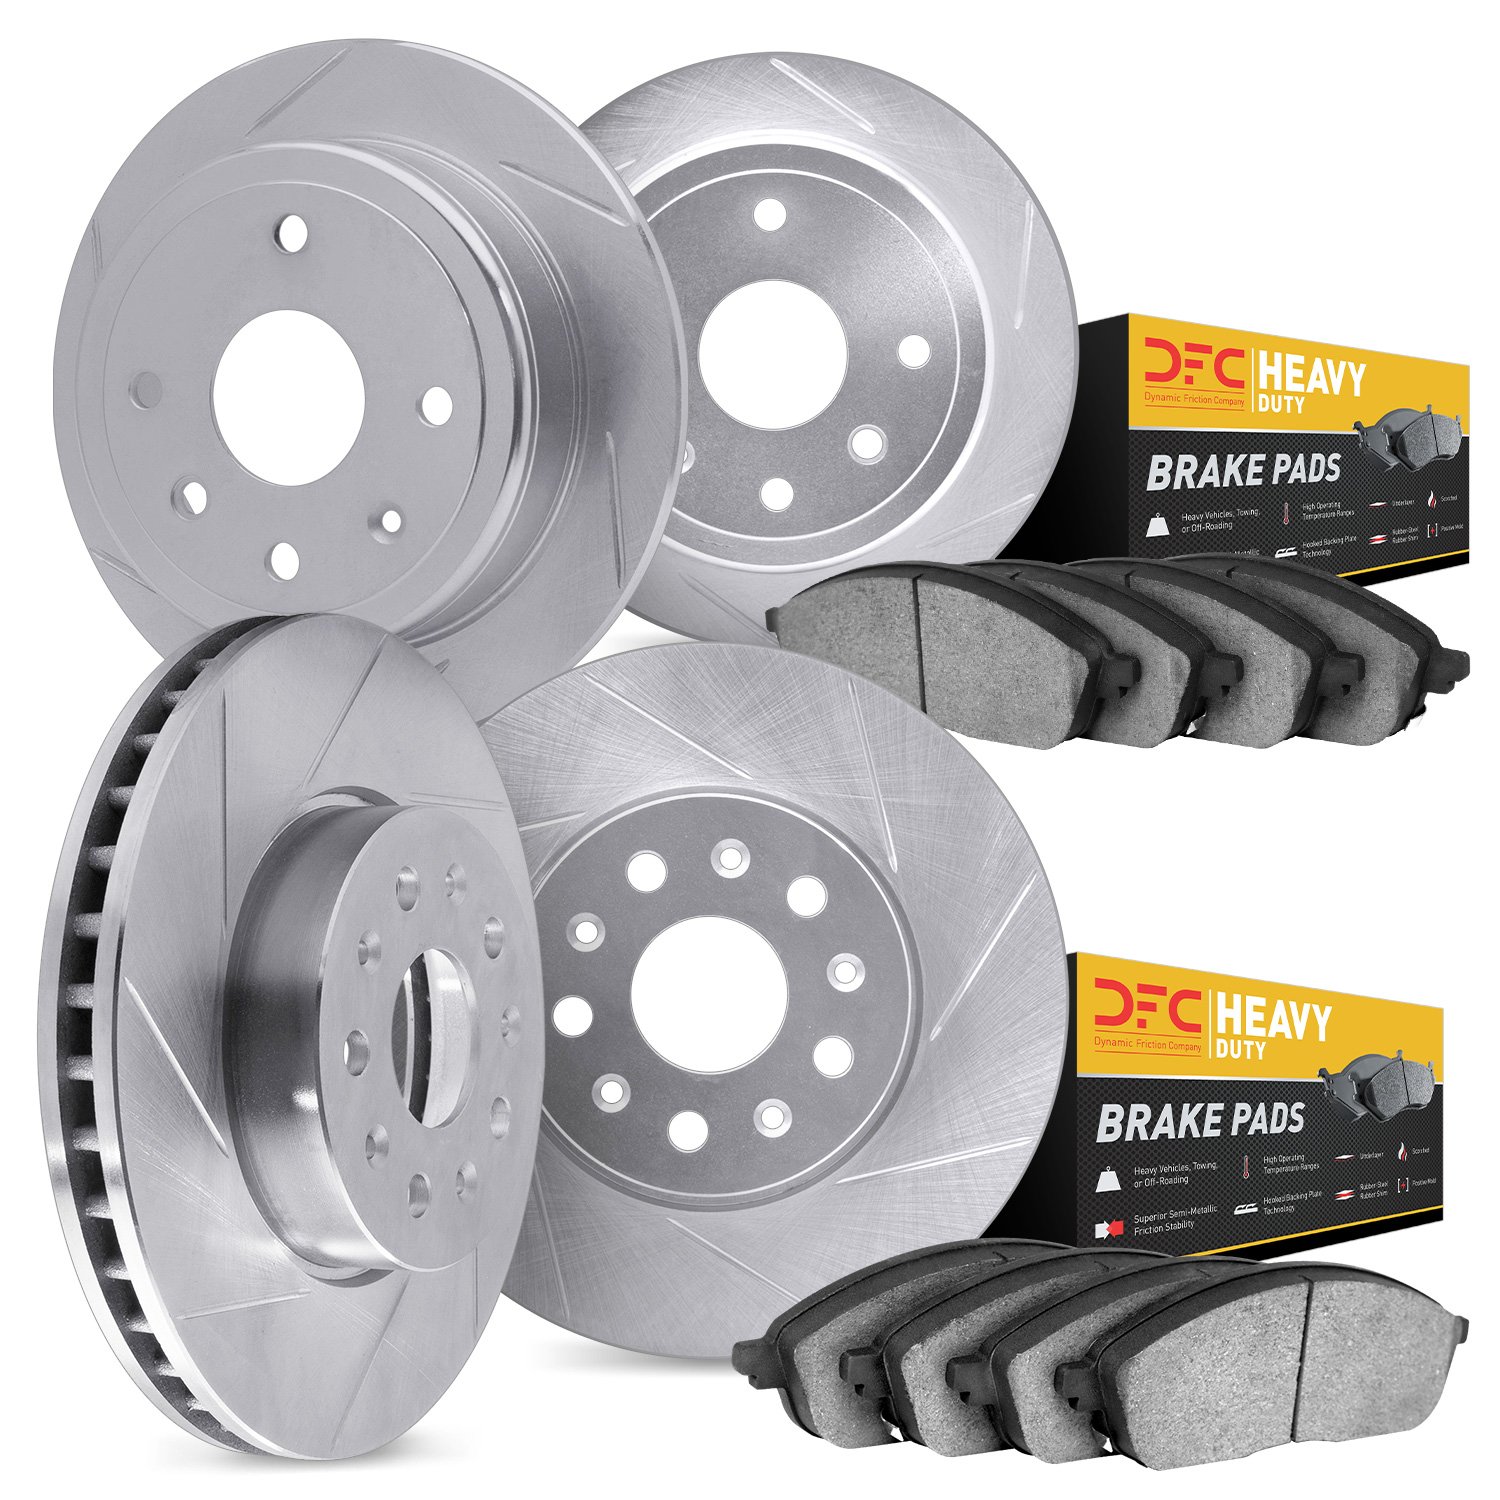 5204-99116 Slotted Brake Rotors w/Heavy-Duty Brake Pads Kits [Silver], 2020-2020 Ford/Lincoln/Mercury/Mazda, Position: Front and